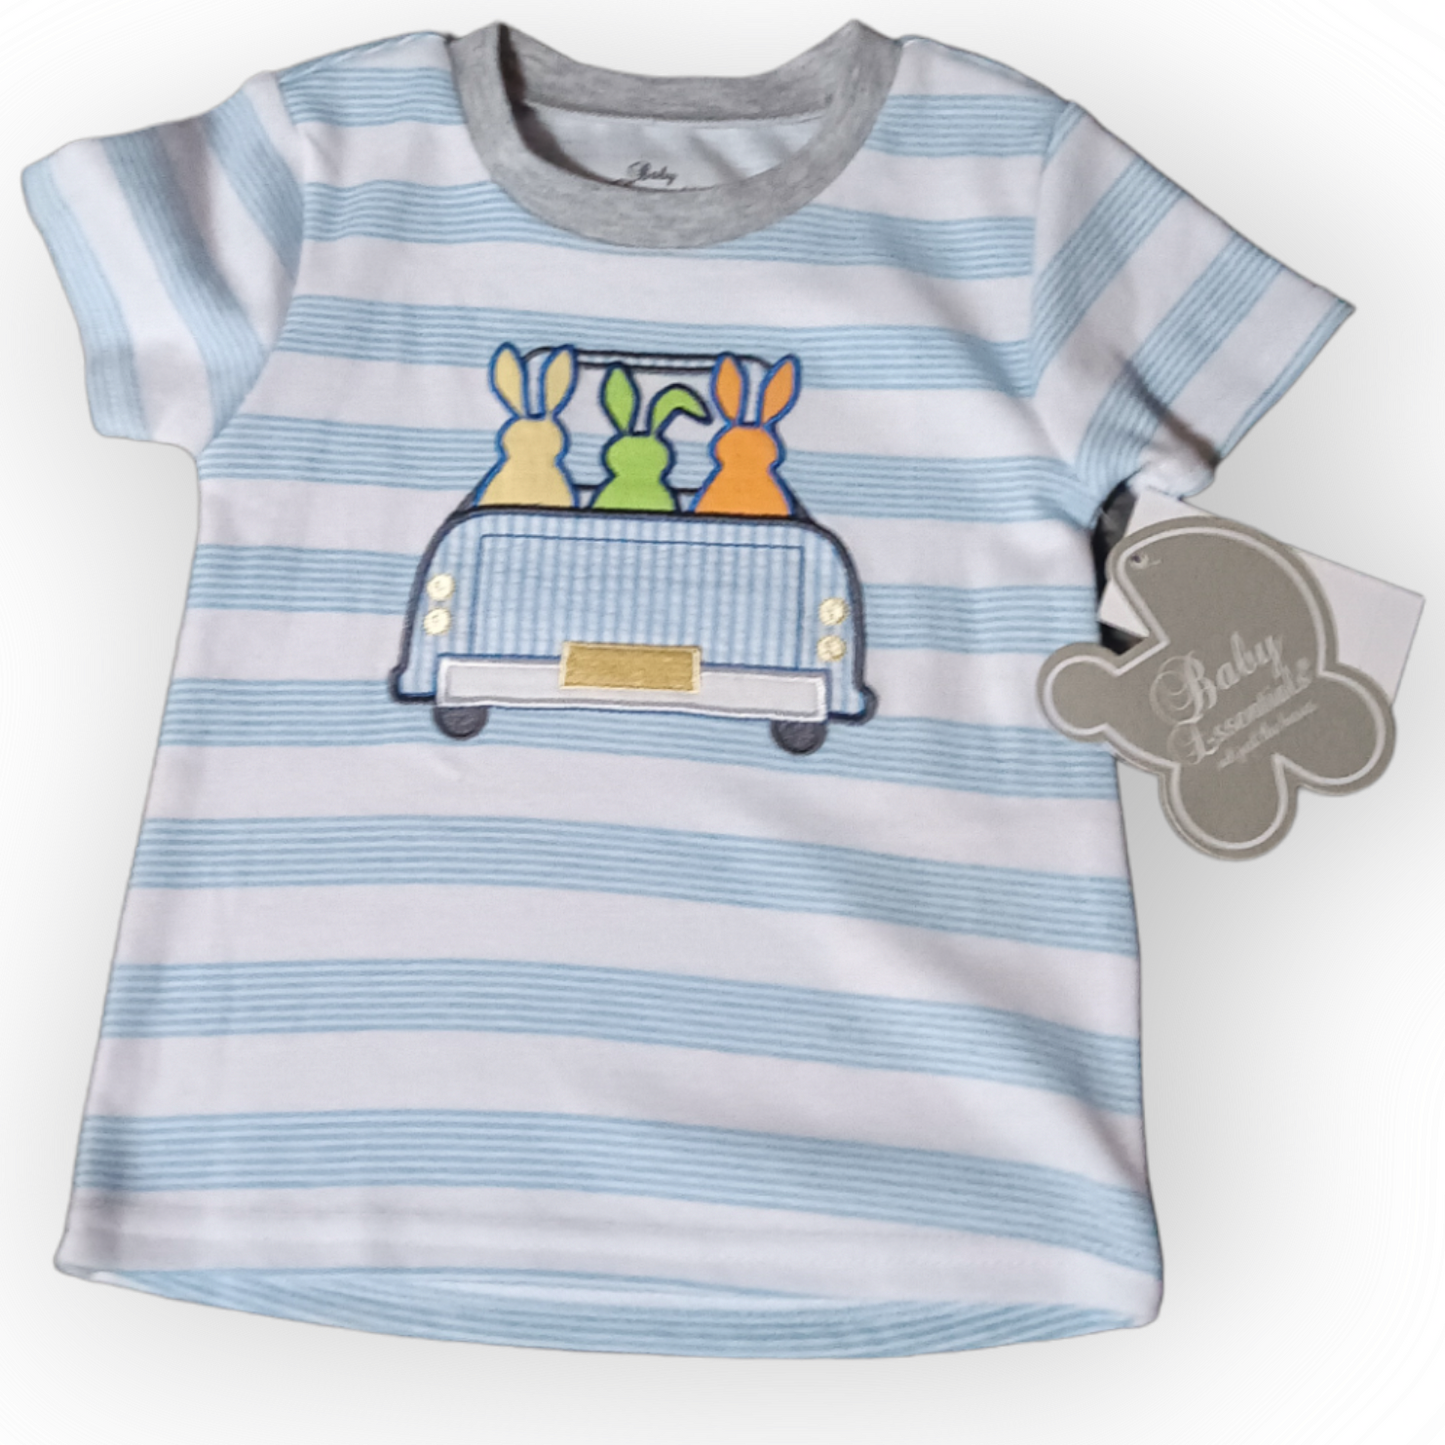 Baby Essentials Easter Shorts & Shirt - Size 12 Months